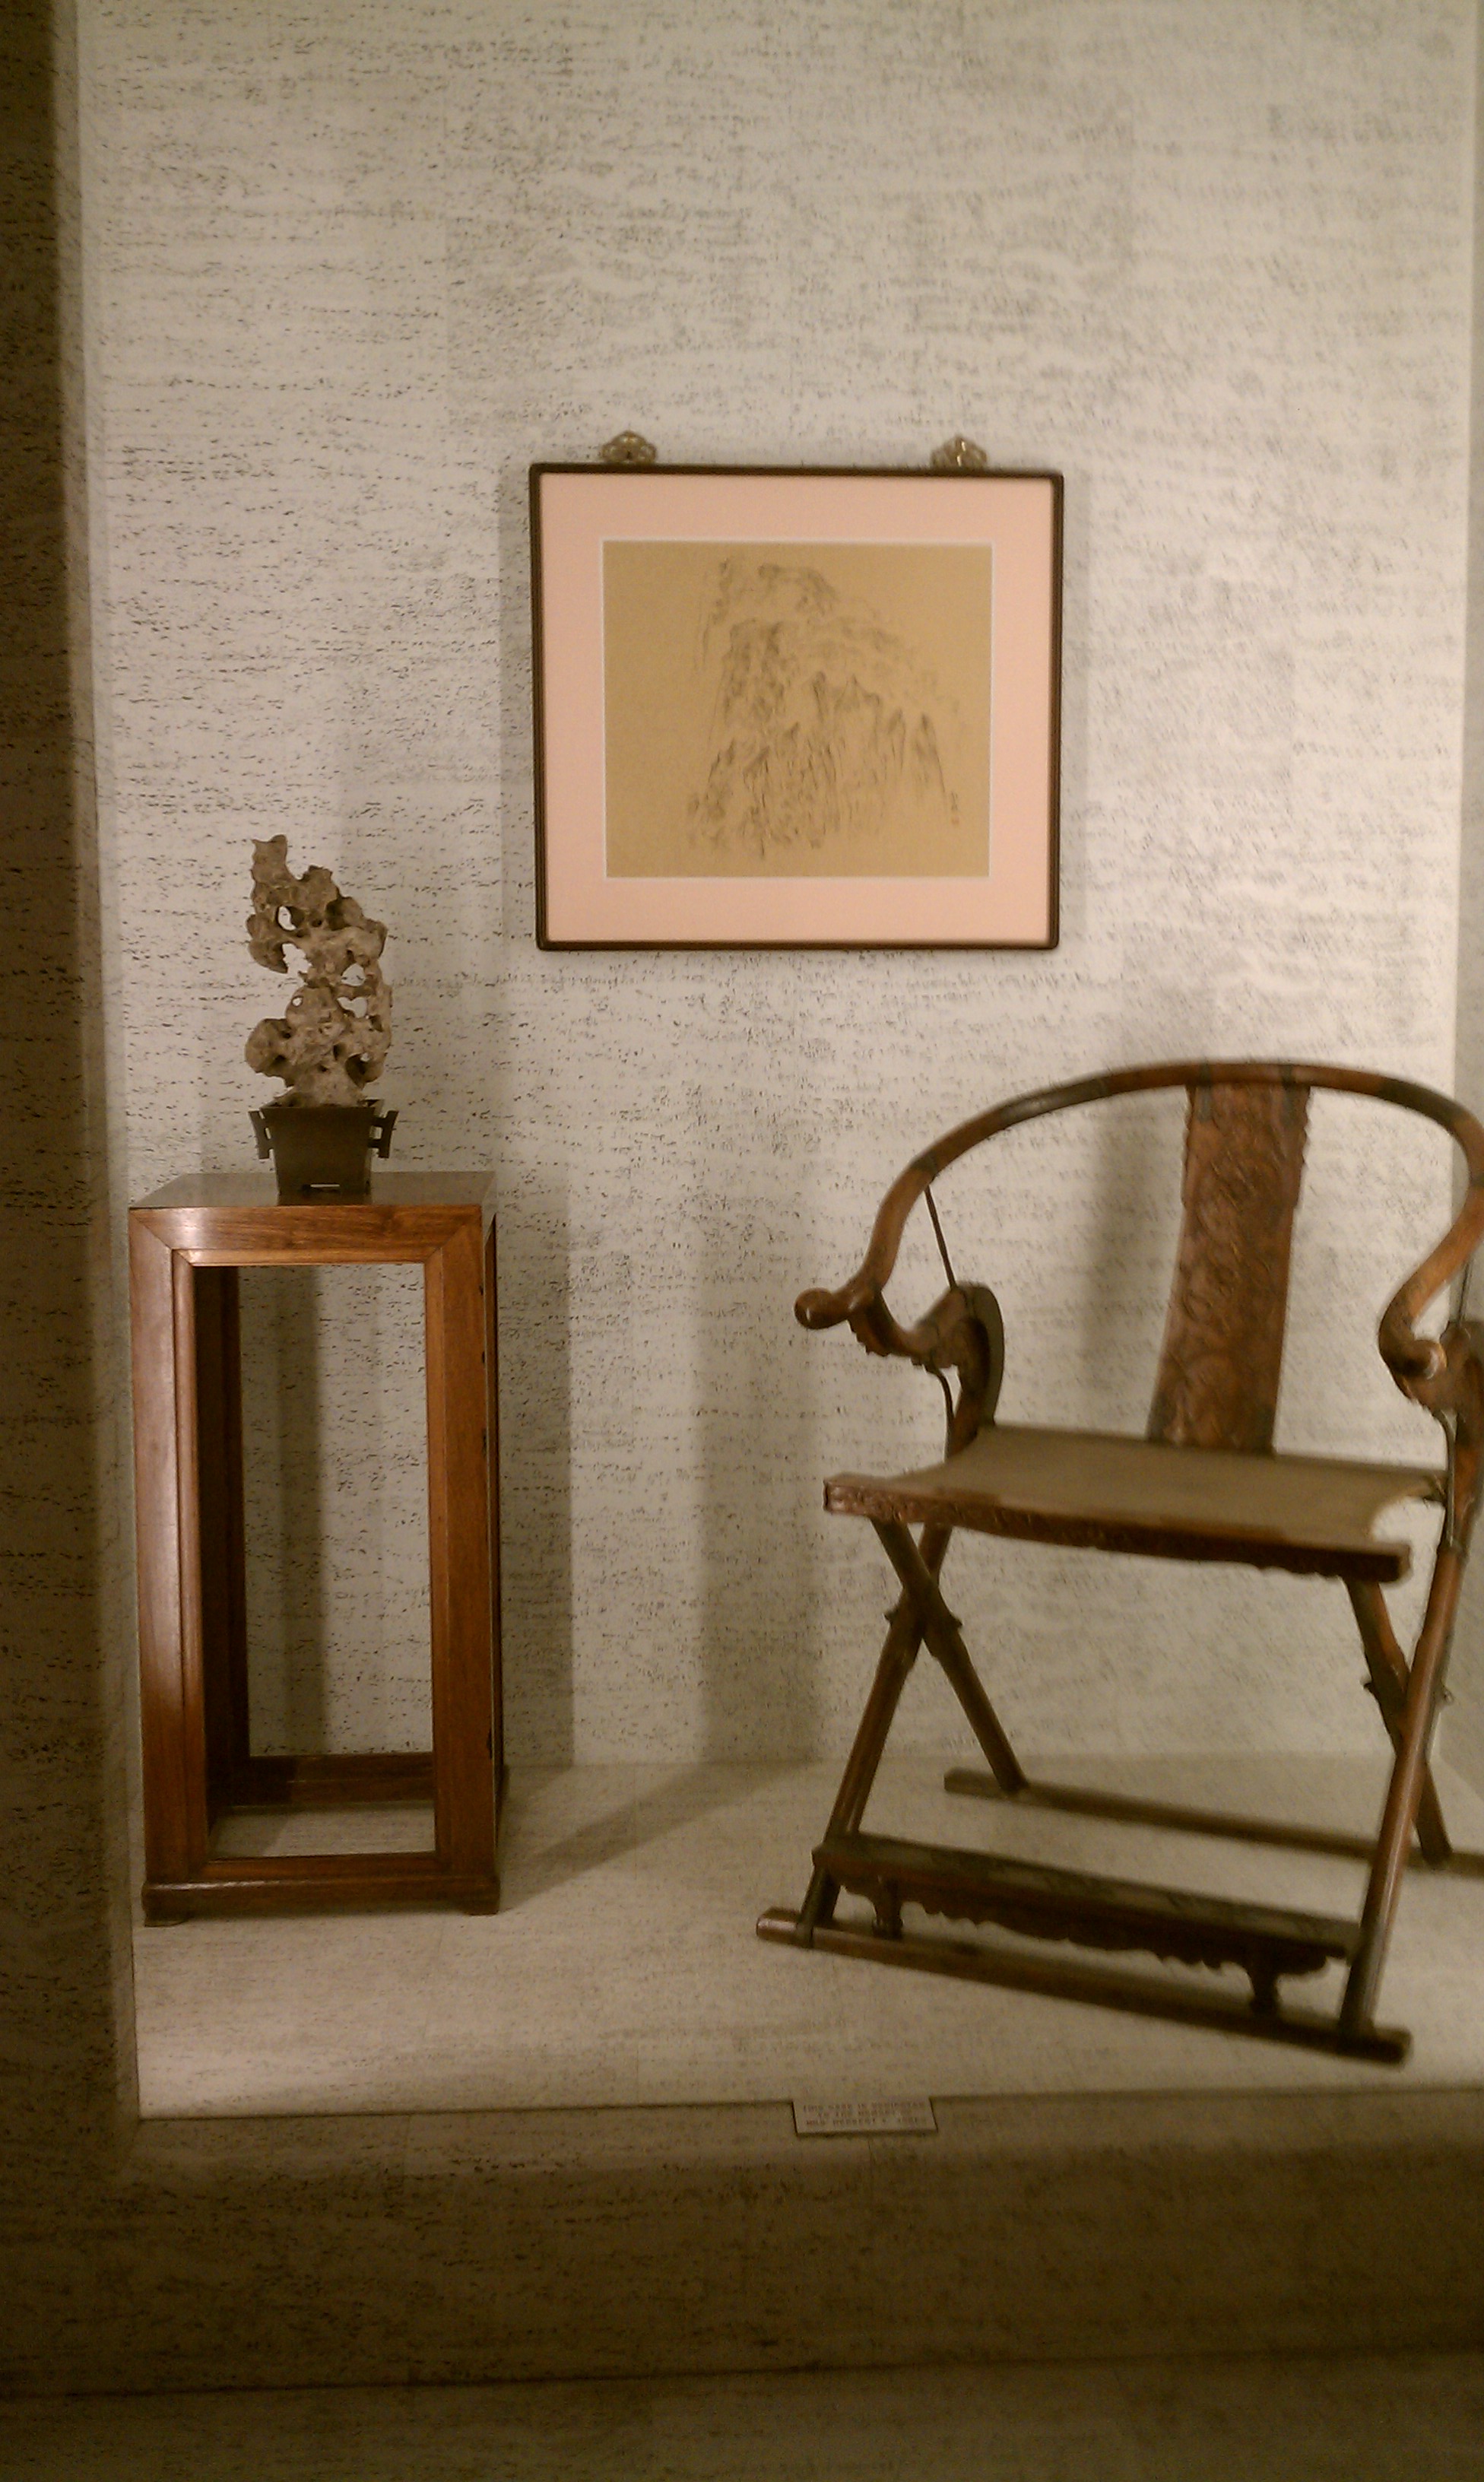 Chinese art: Ancient furniture and modern painting. Note scholar stone on table.